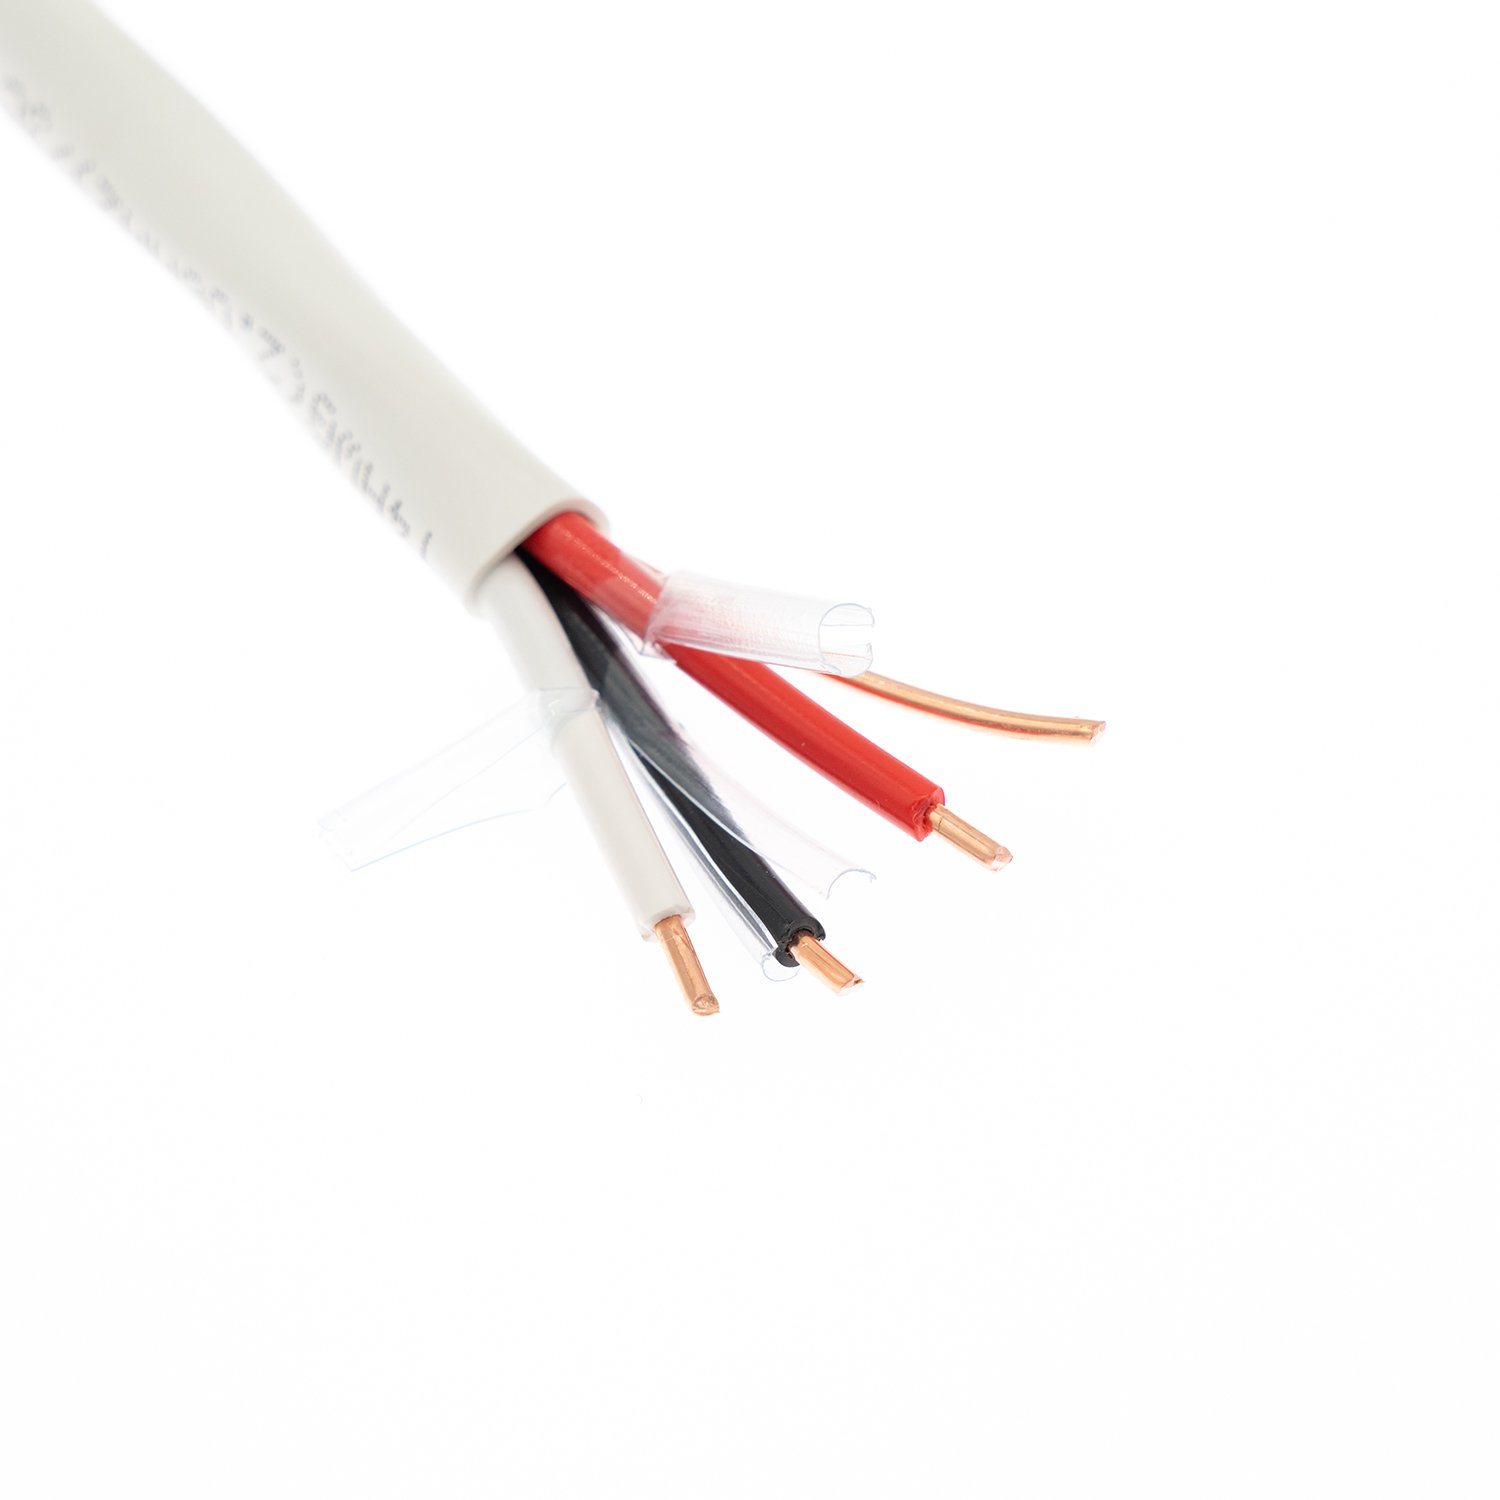 CSA 22.2 N0.48 10-2 Building Housing PVC Nonmetallic-Sheathed Cables Nmd90 Cable Wire